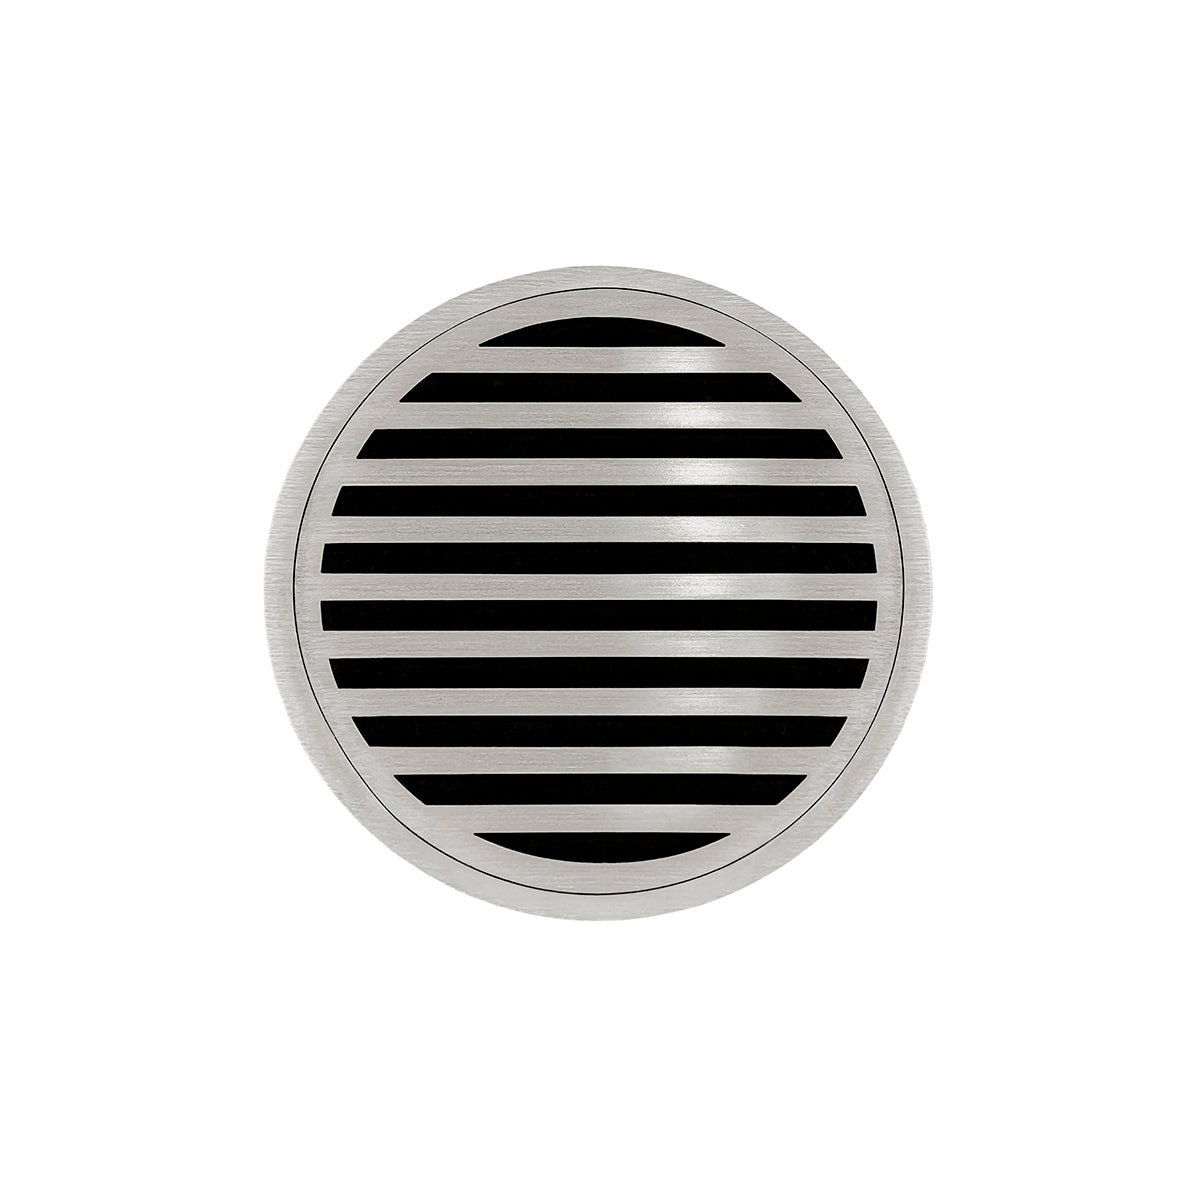 Infinity Drain 5" Round RND 5 Premium Center Drain Kit with Lines Pattern Decorative Plate with Cast Iron Drain Body, 2" Outlet